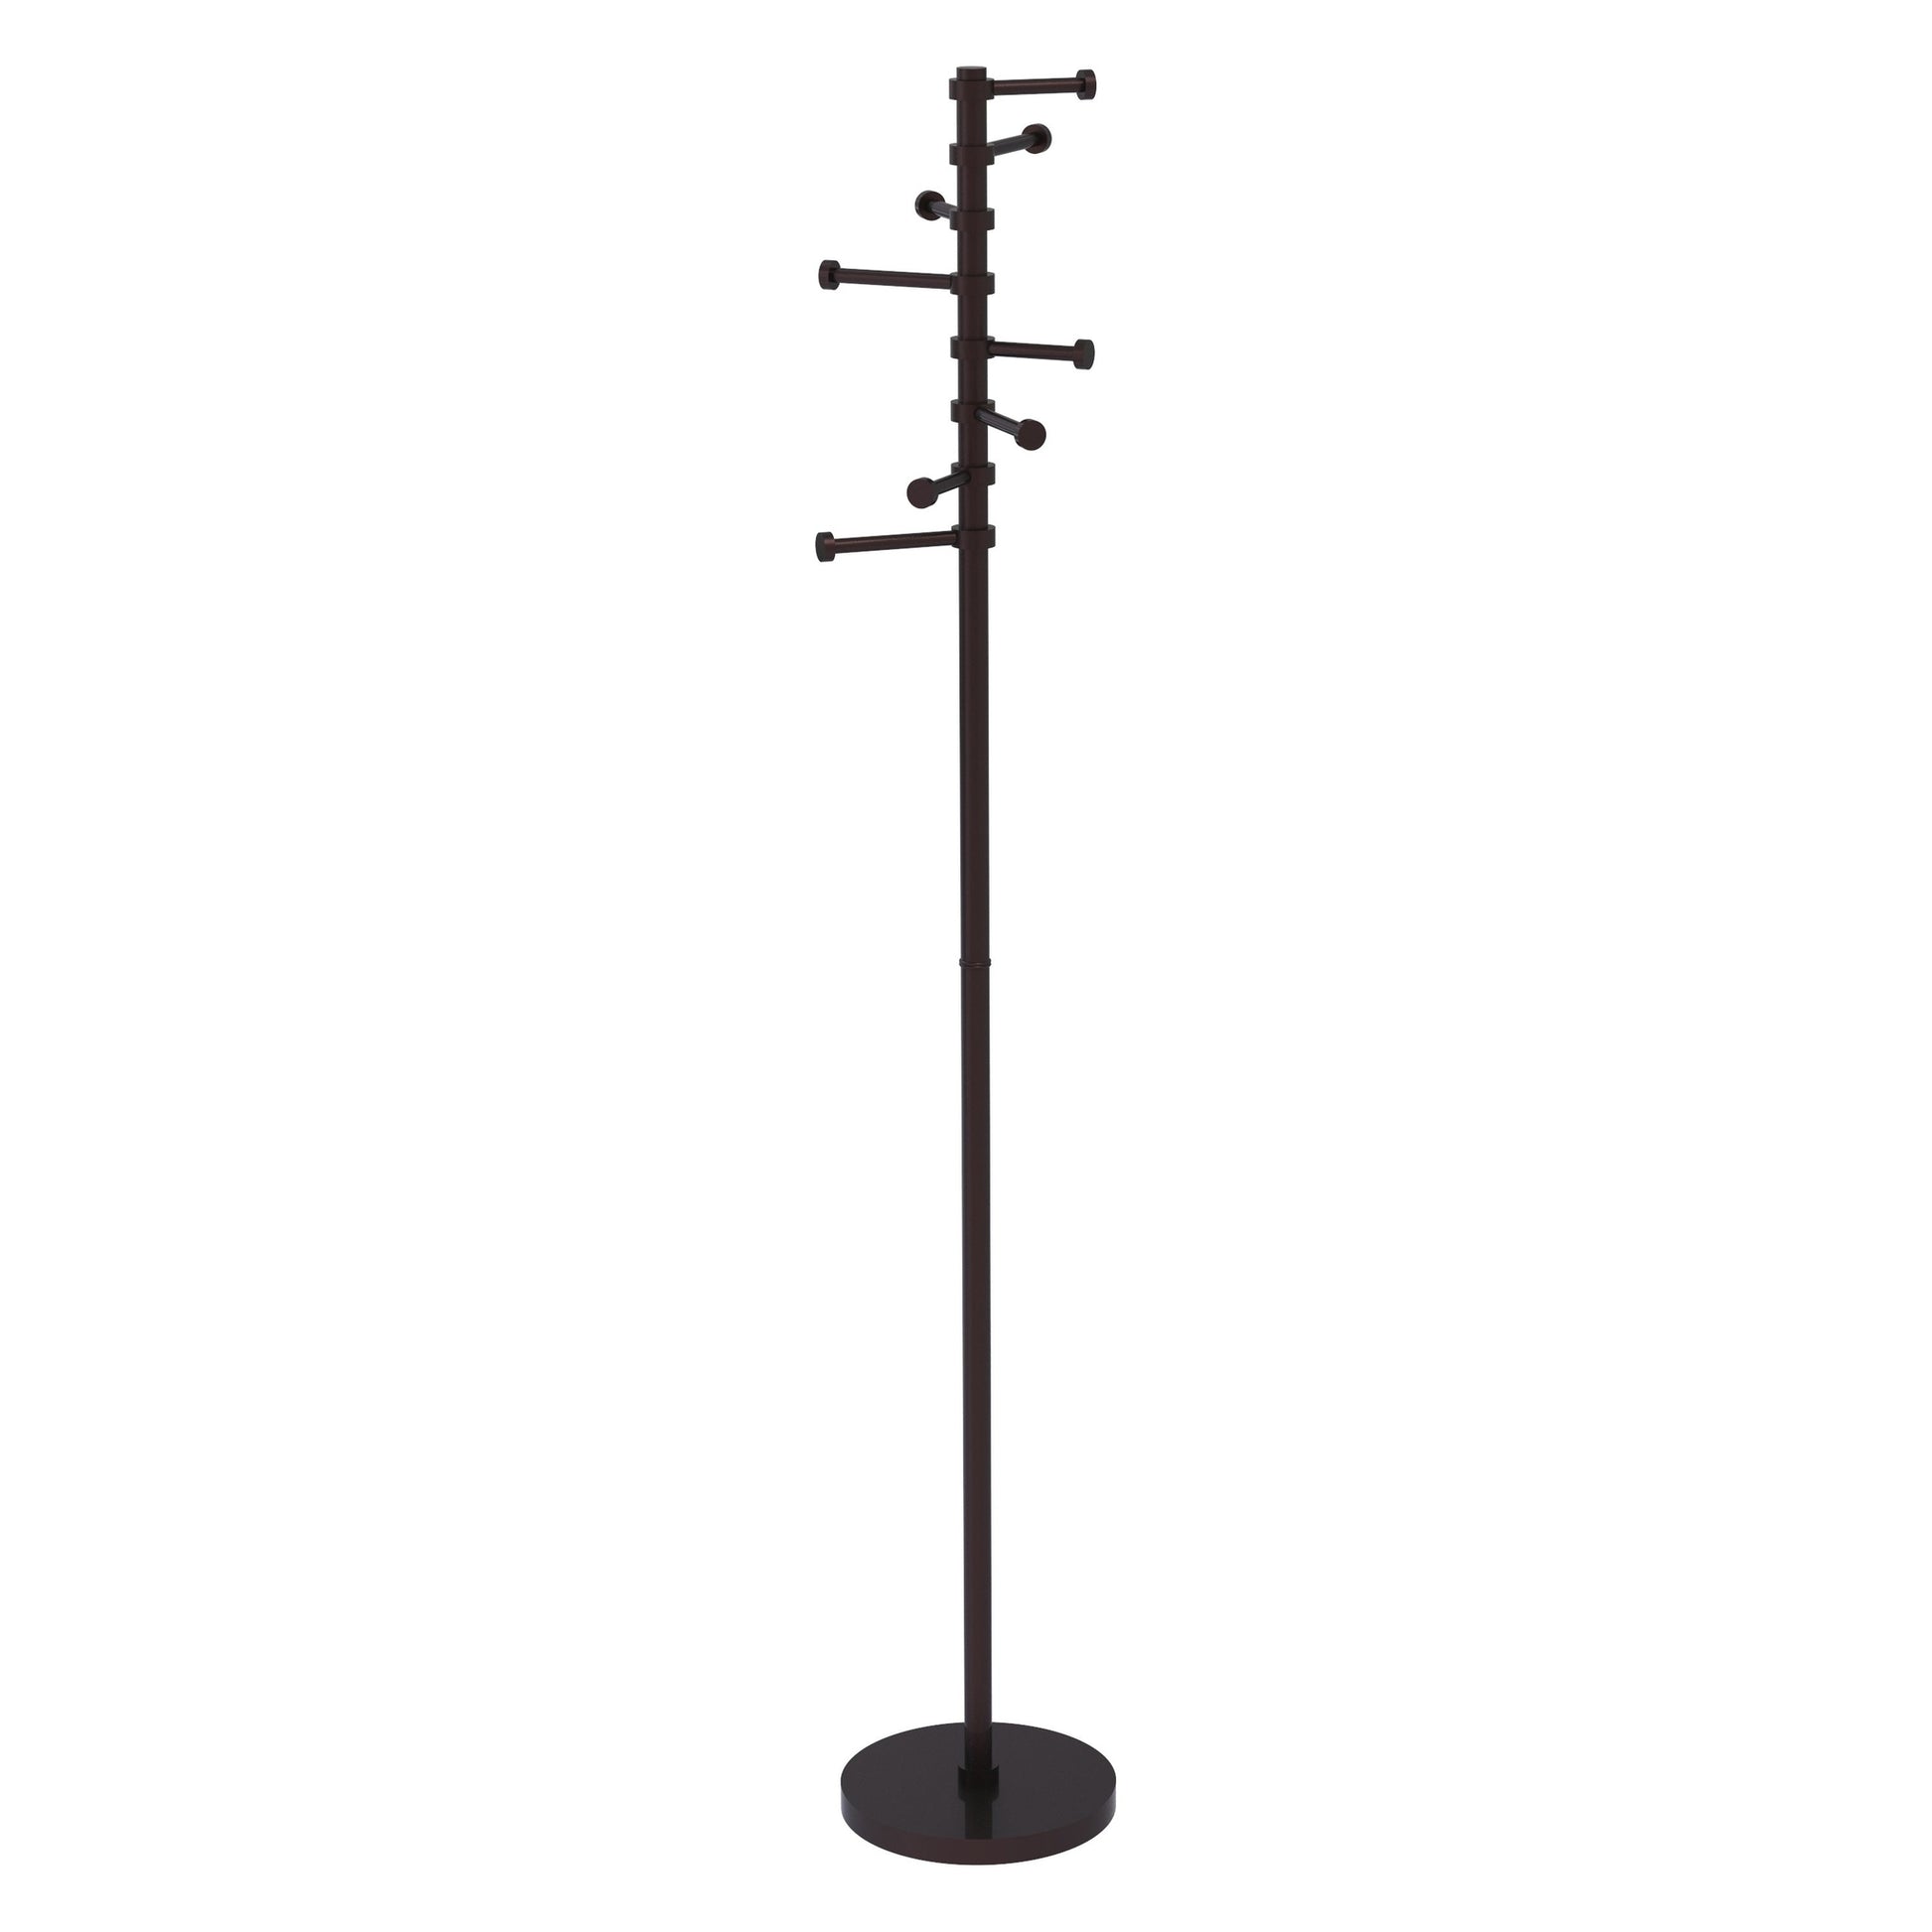 Allied Brass CS-1 10" x 10" Antique Bronze Solid Brass Free Standing Coat Rack With Six Pivoting Pegs